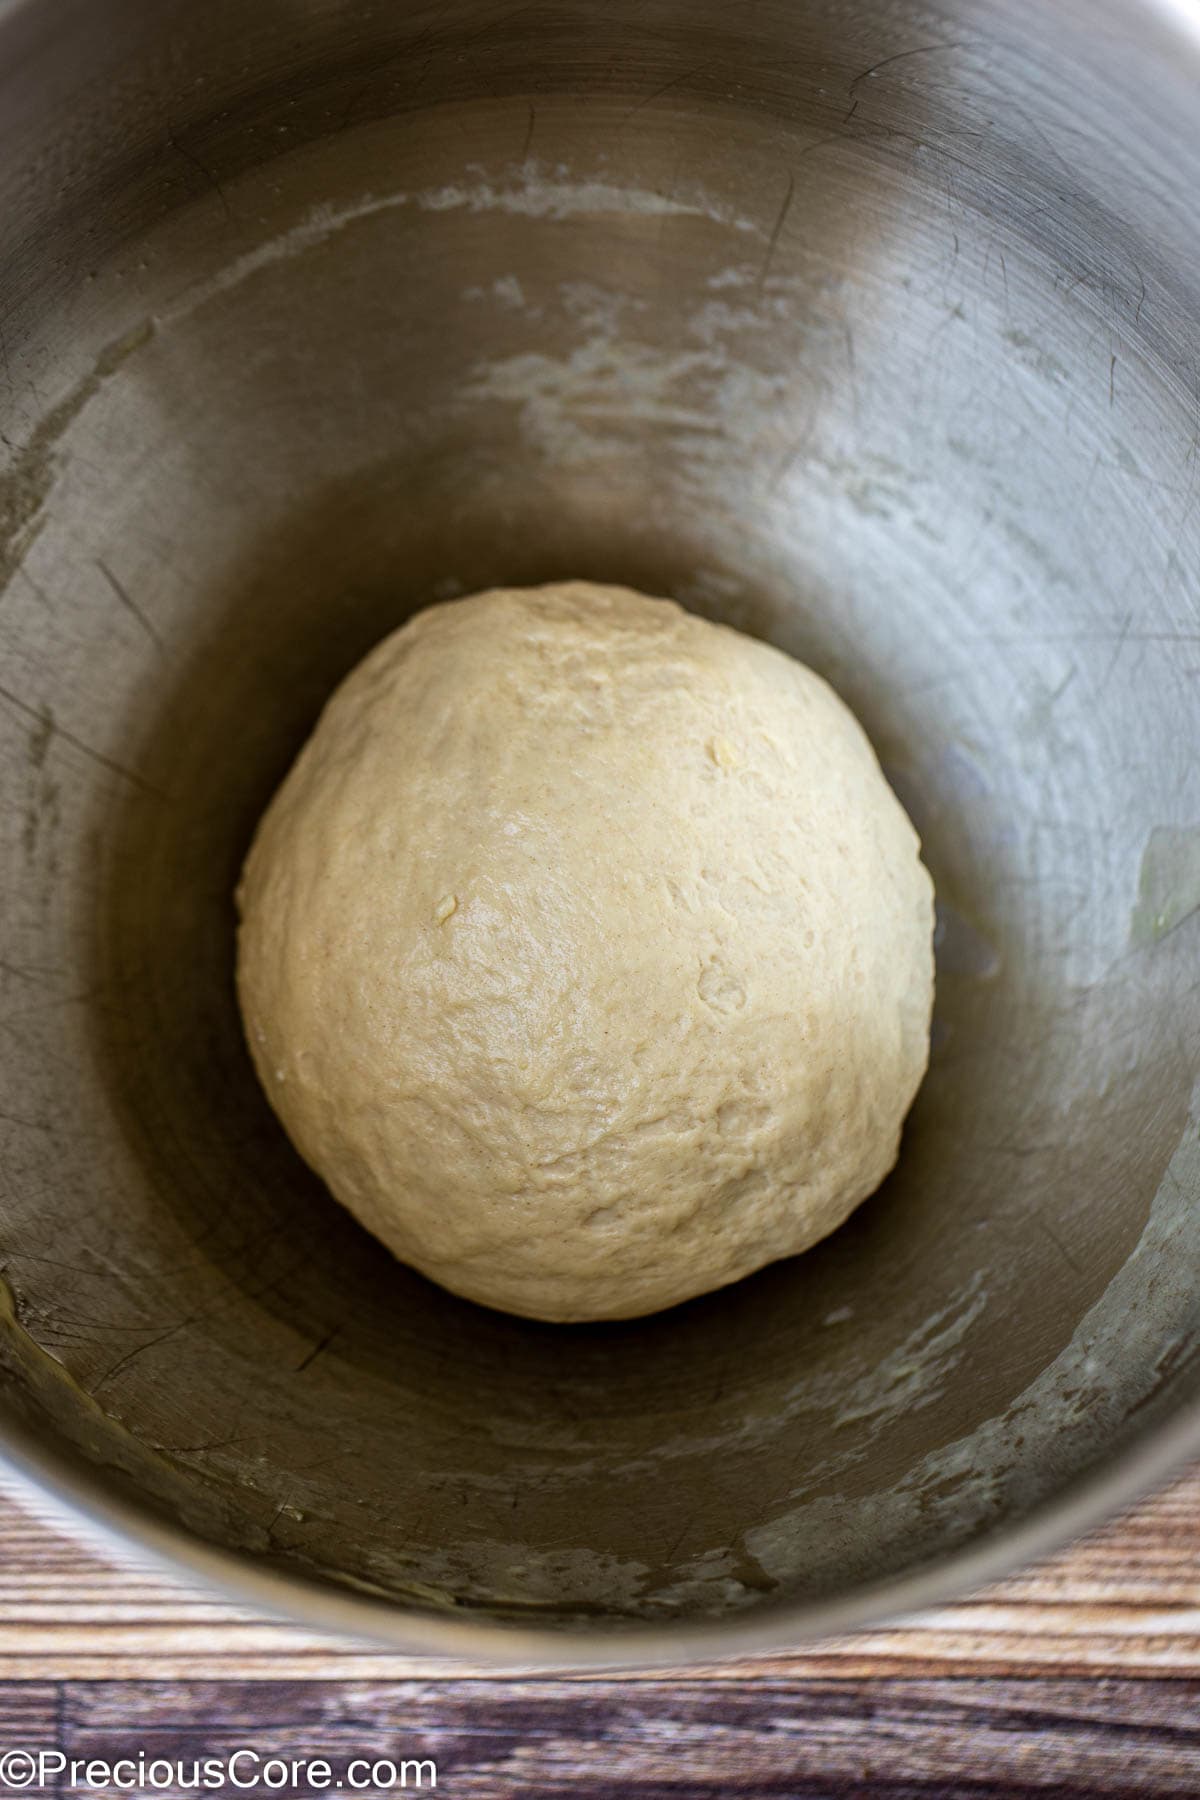 Kneaded dough for pizza in an oiled bowl.